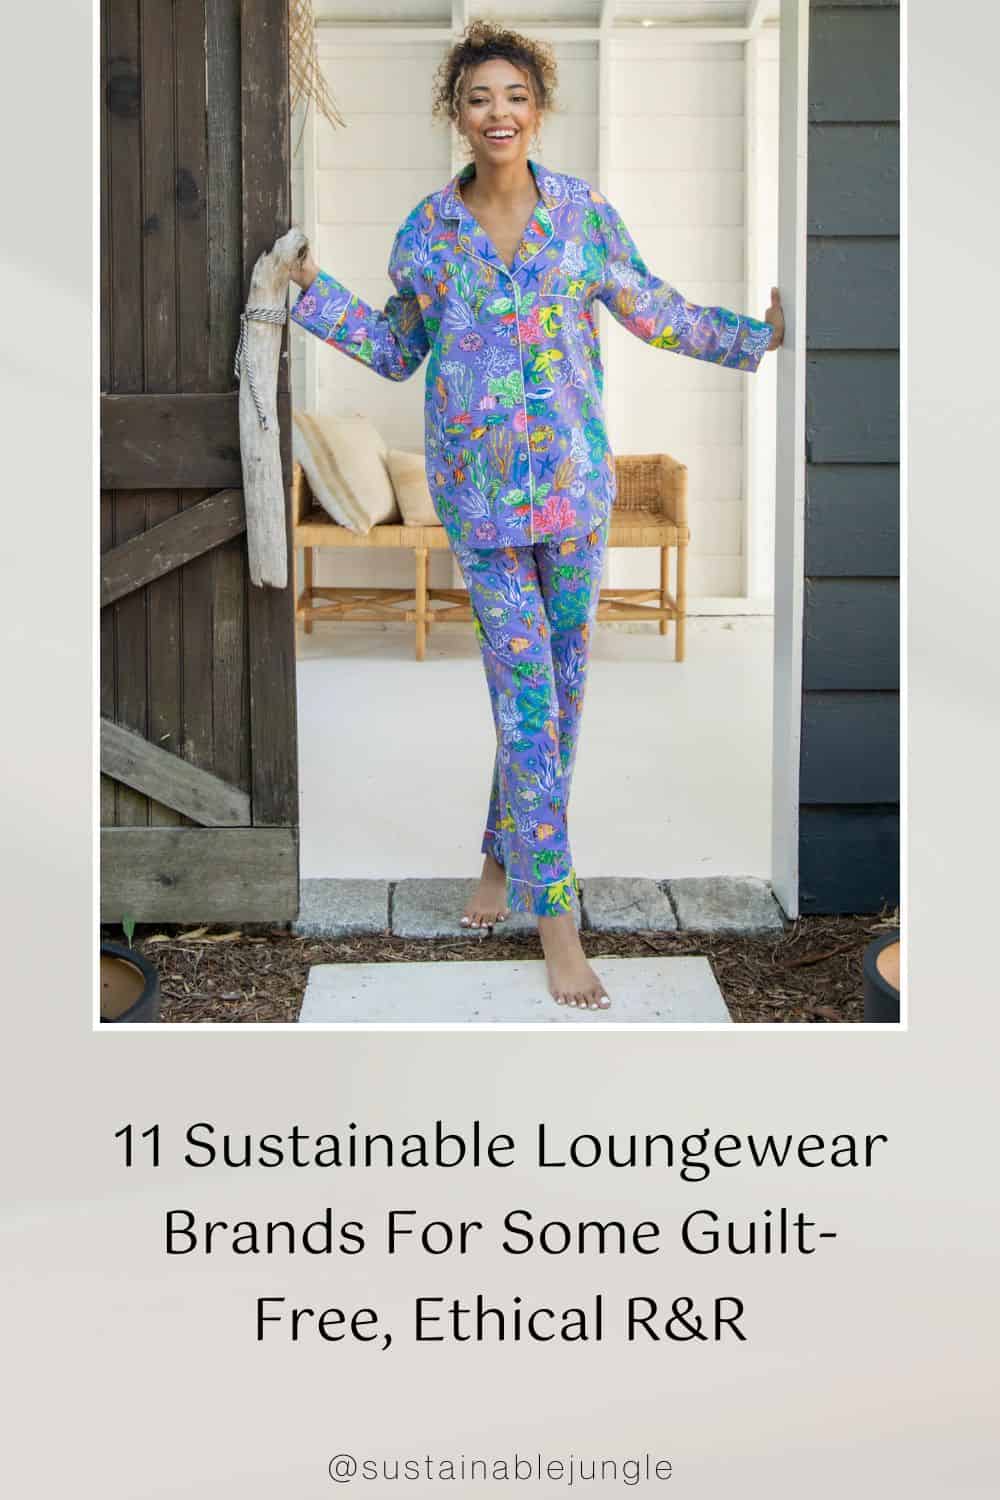 11 Sustainable Loungewear Brands For Some Guilt-Free, Ethical R&R Image by Printfresh #sustainableloungewear #sustainableloungewearbrands #affordablesustainableloungewear #ethicalloungewear #ethicalloungewearsets #sustainableethicalloungewear #sustainablejungle